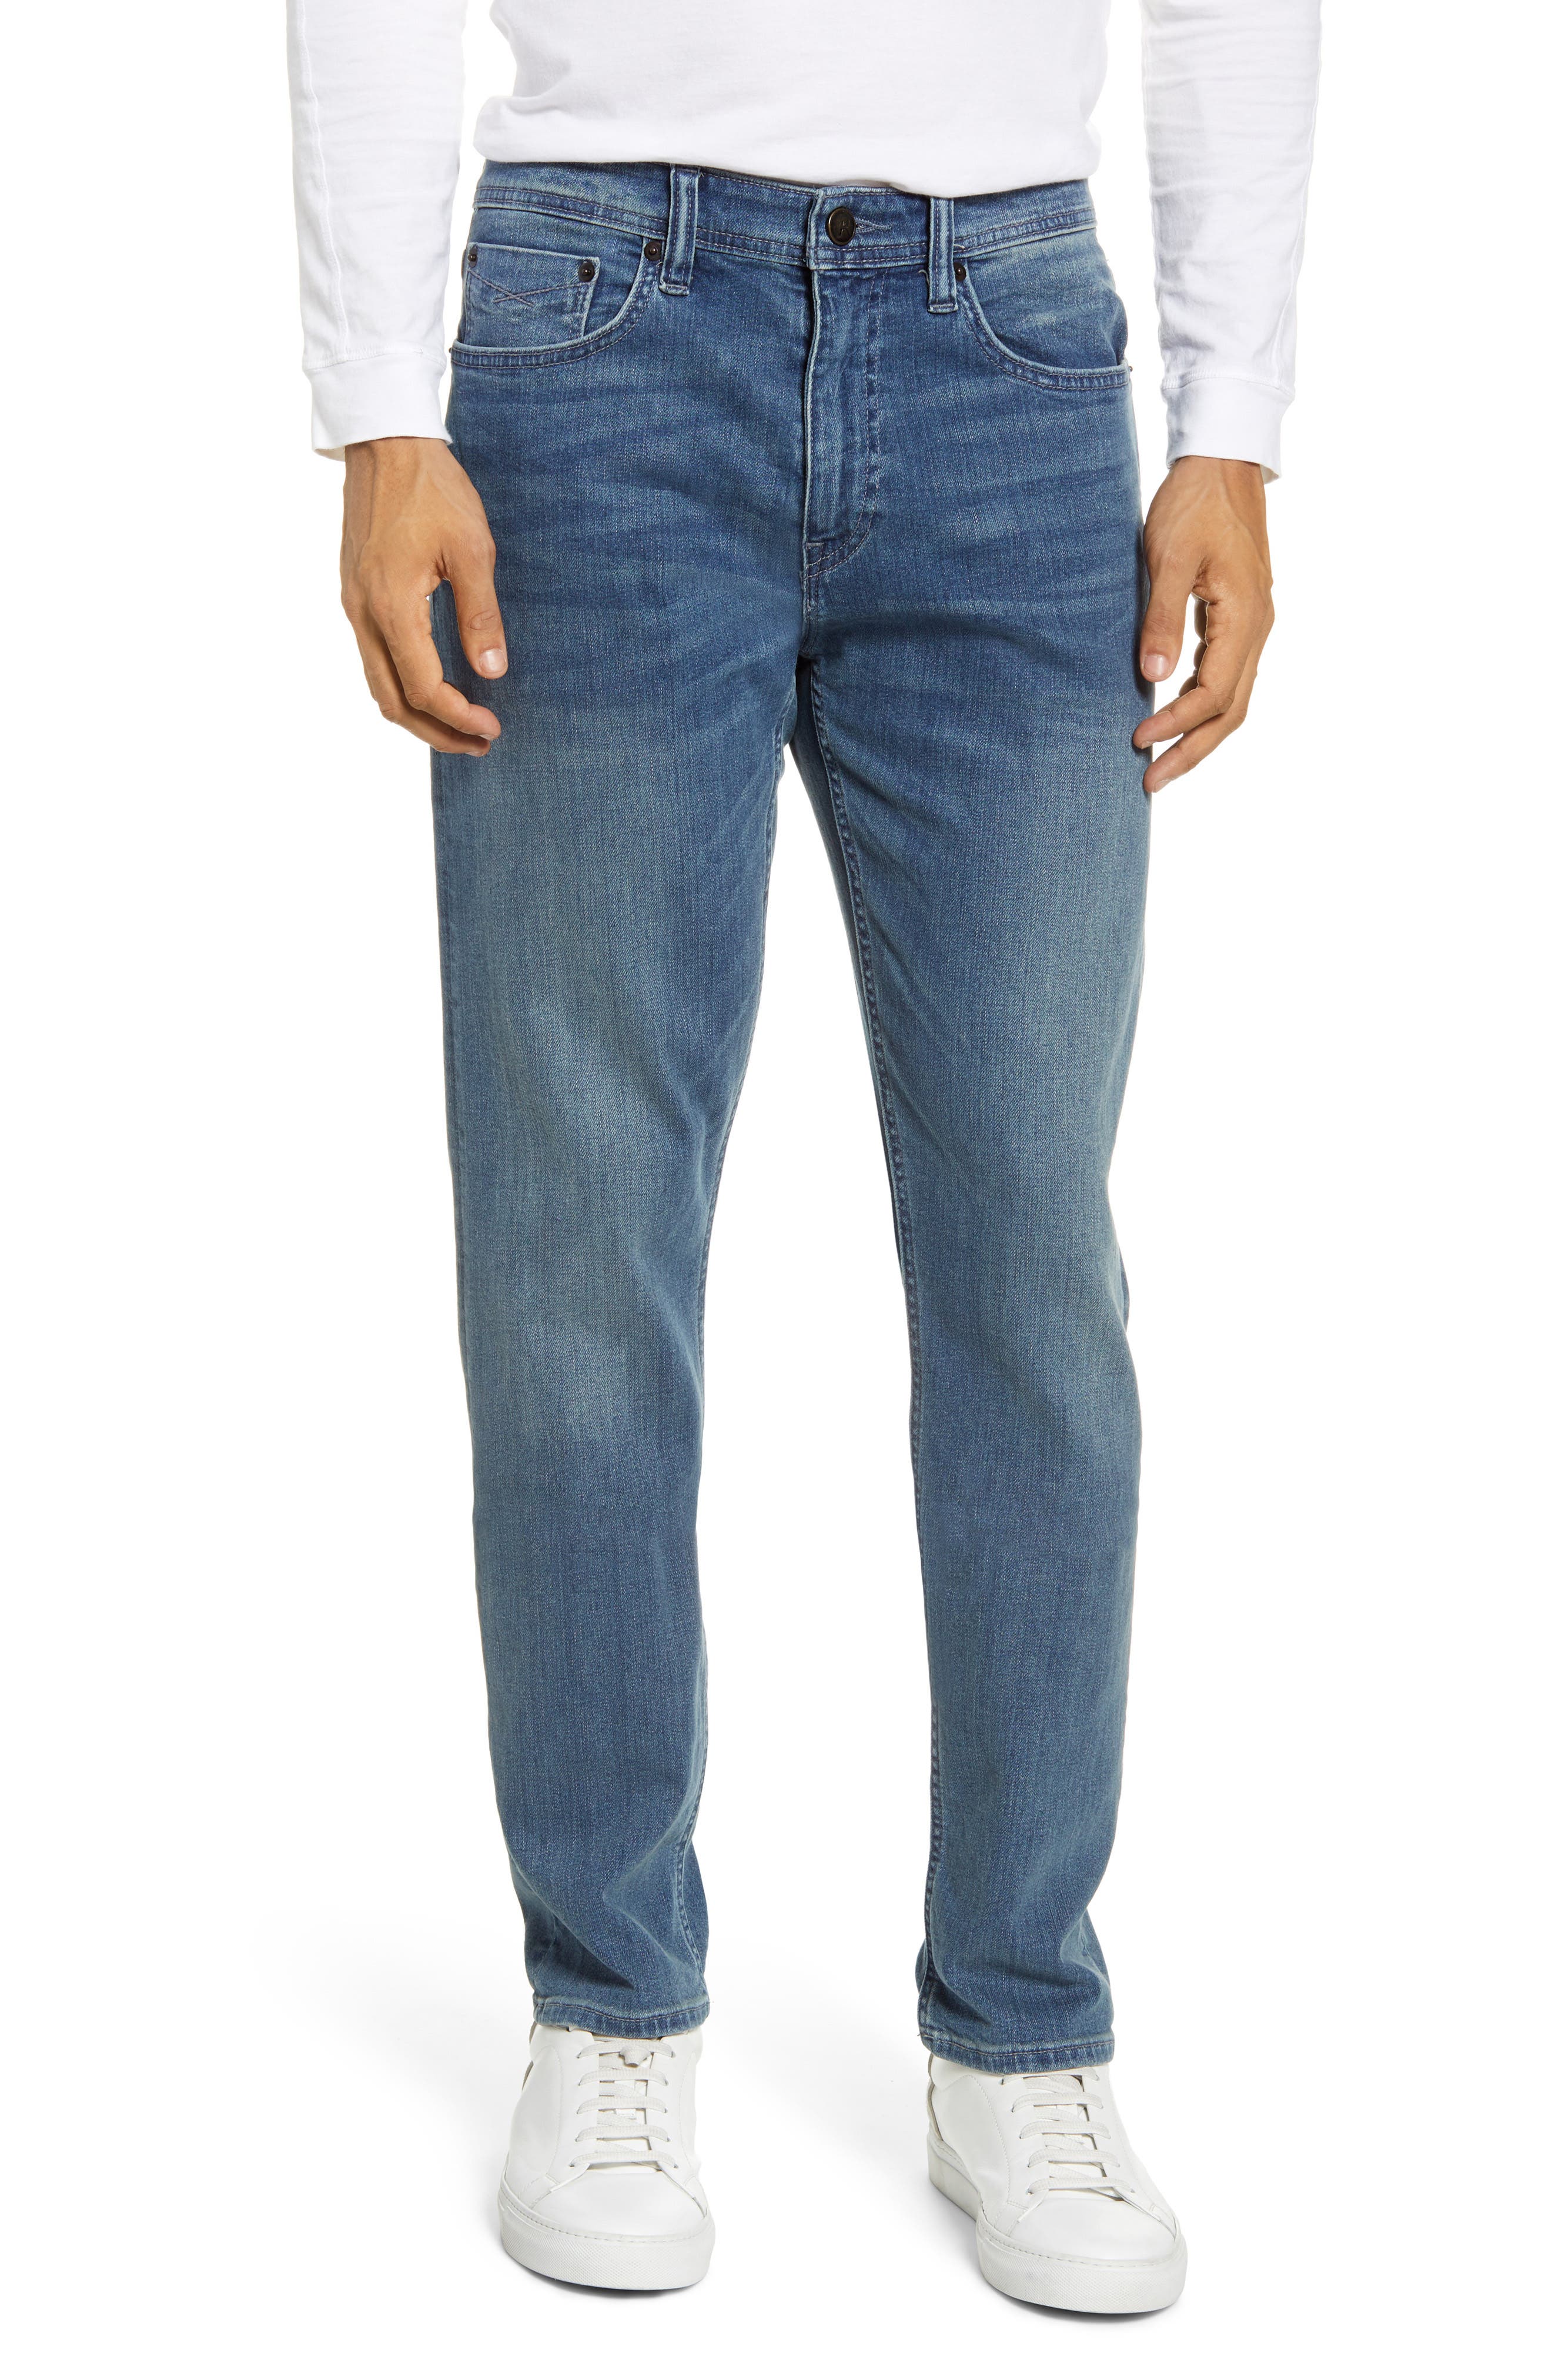 revtown jean review